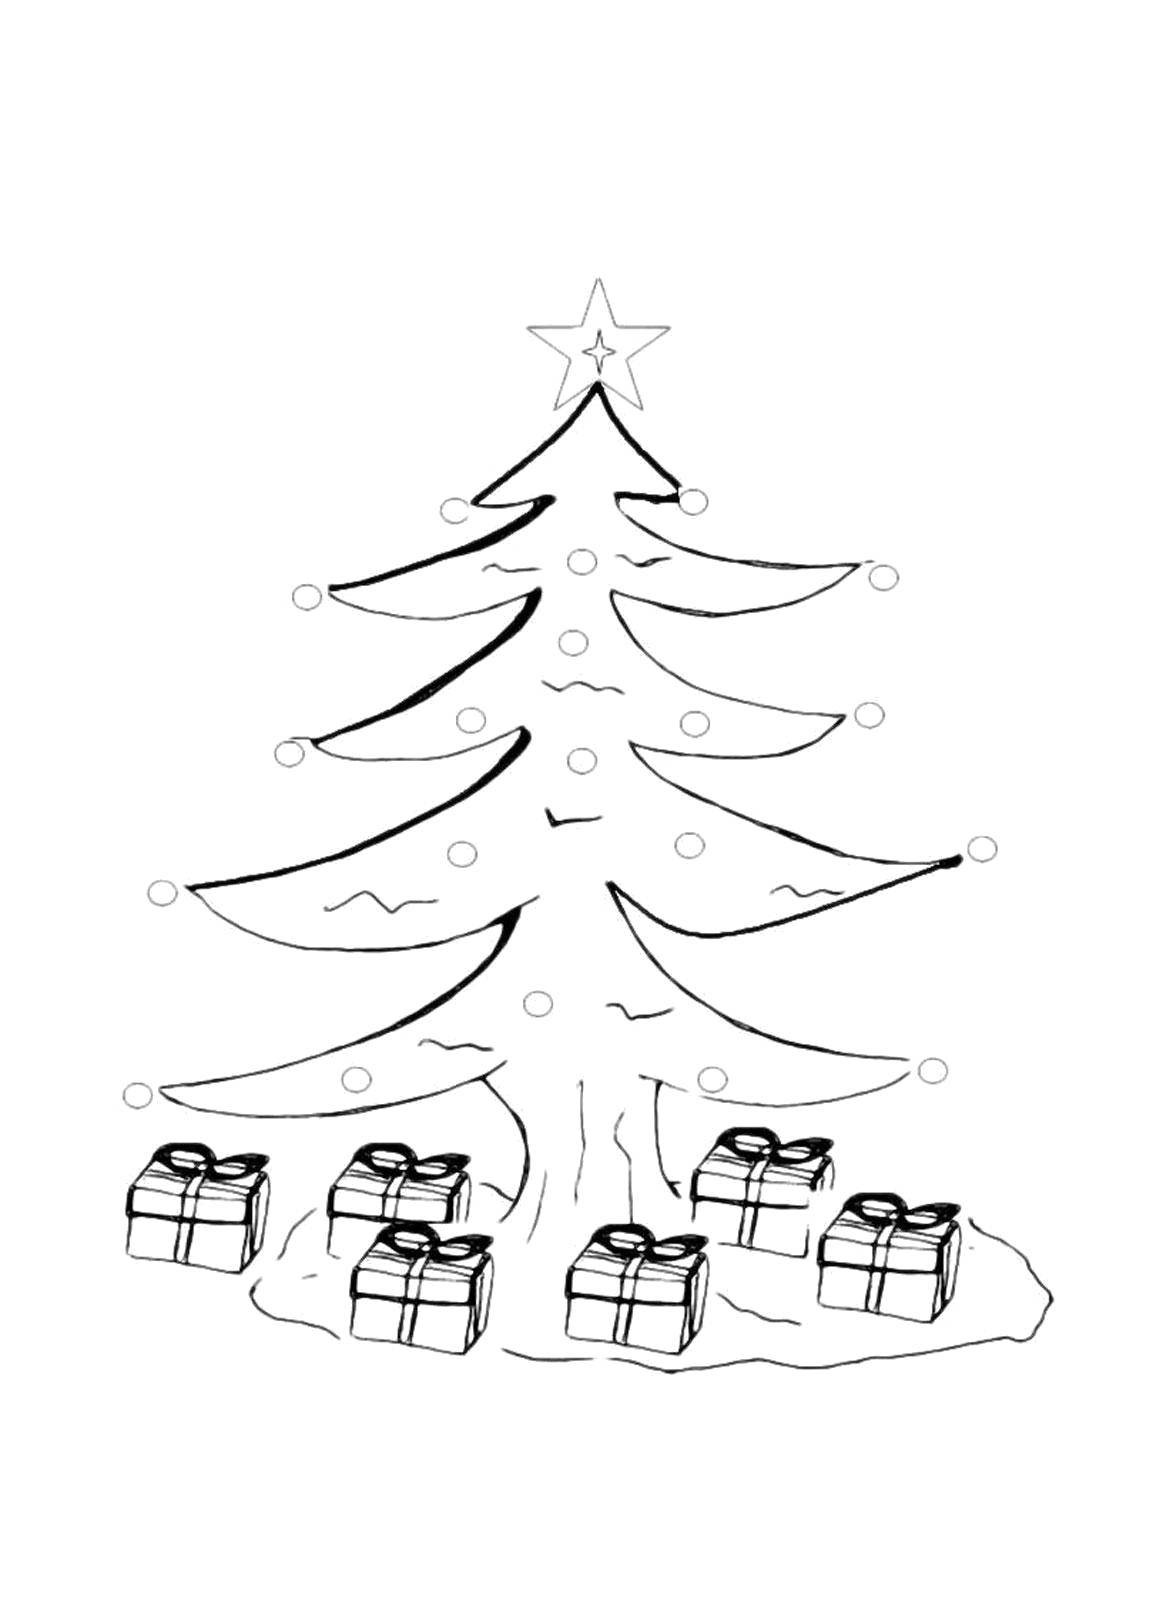 Coloring Christmas tree. Category coloring Christmas tree. Tags:  New Year, tree, gifts, toys.